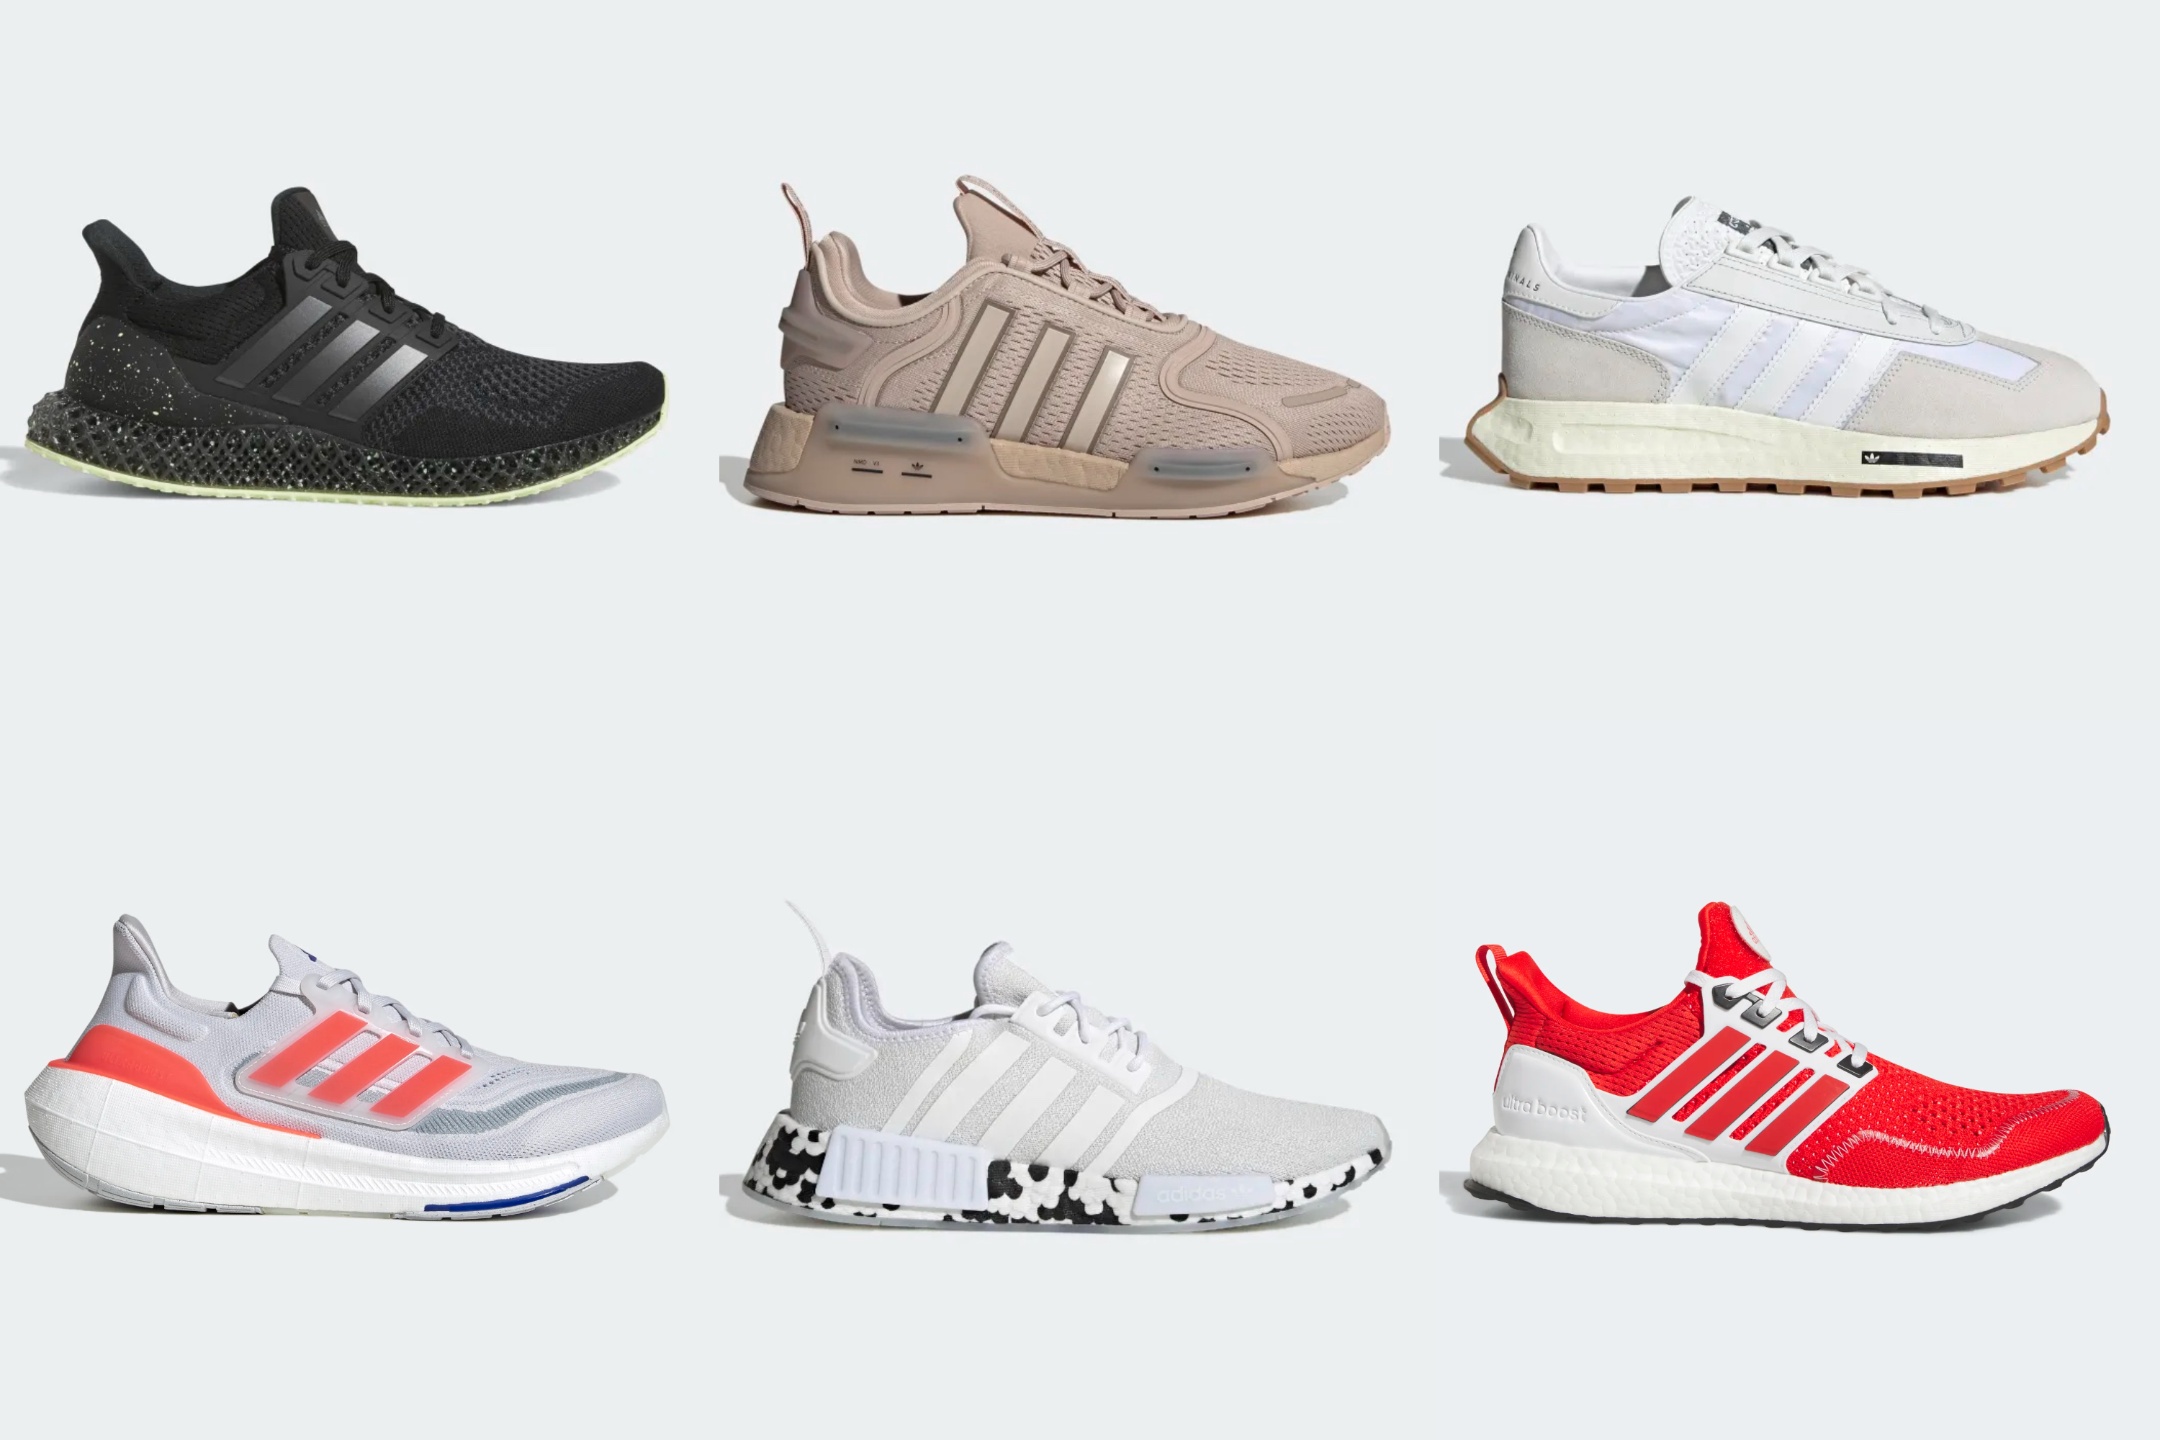 adidas Just Launched Their Big Summer Sale, With Up To 50% Off Select ...